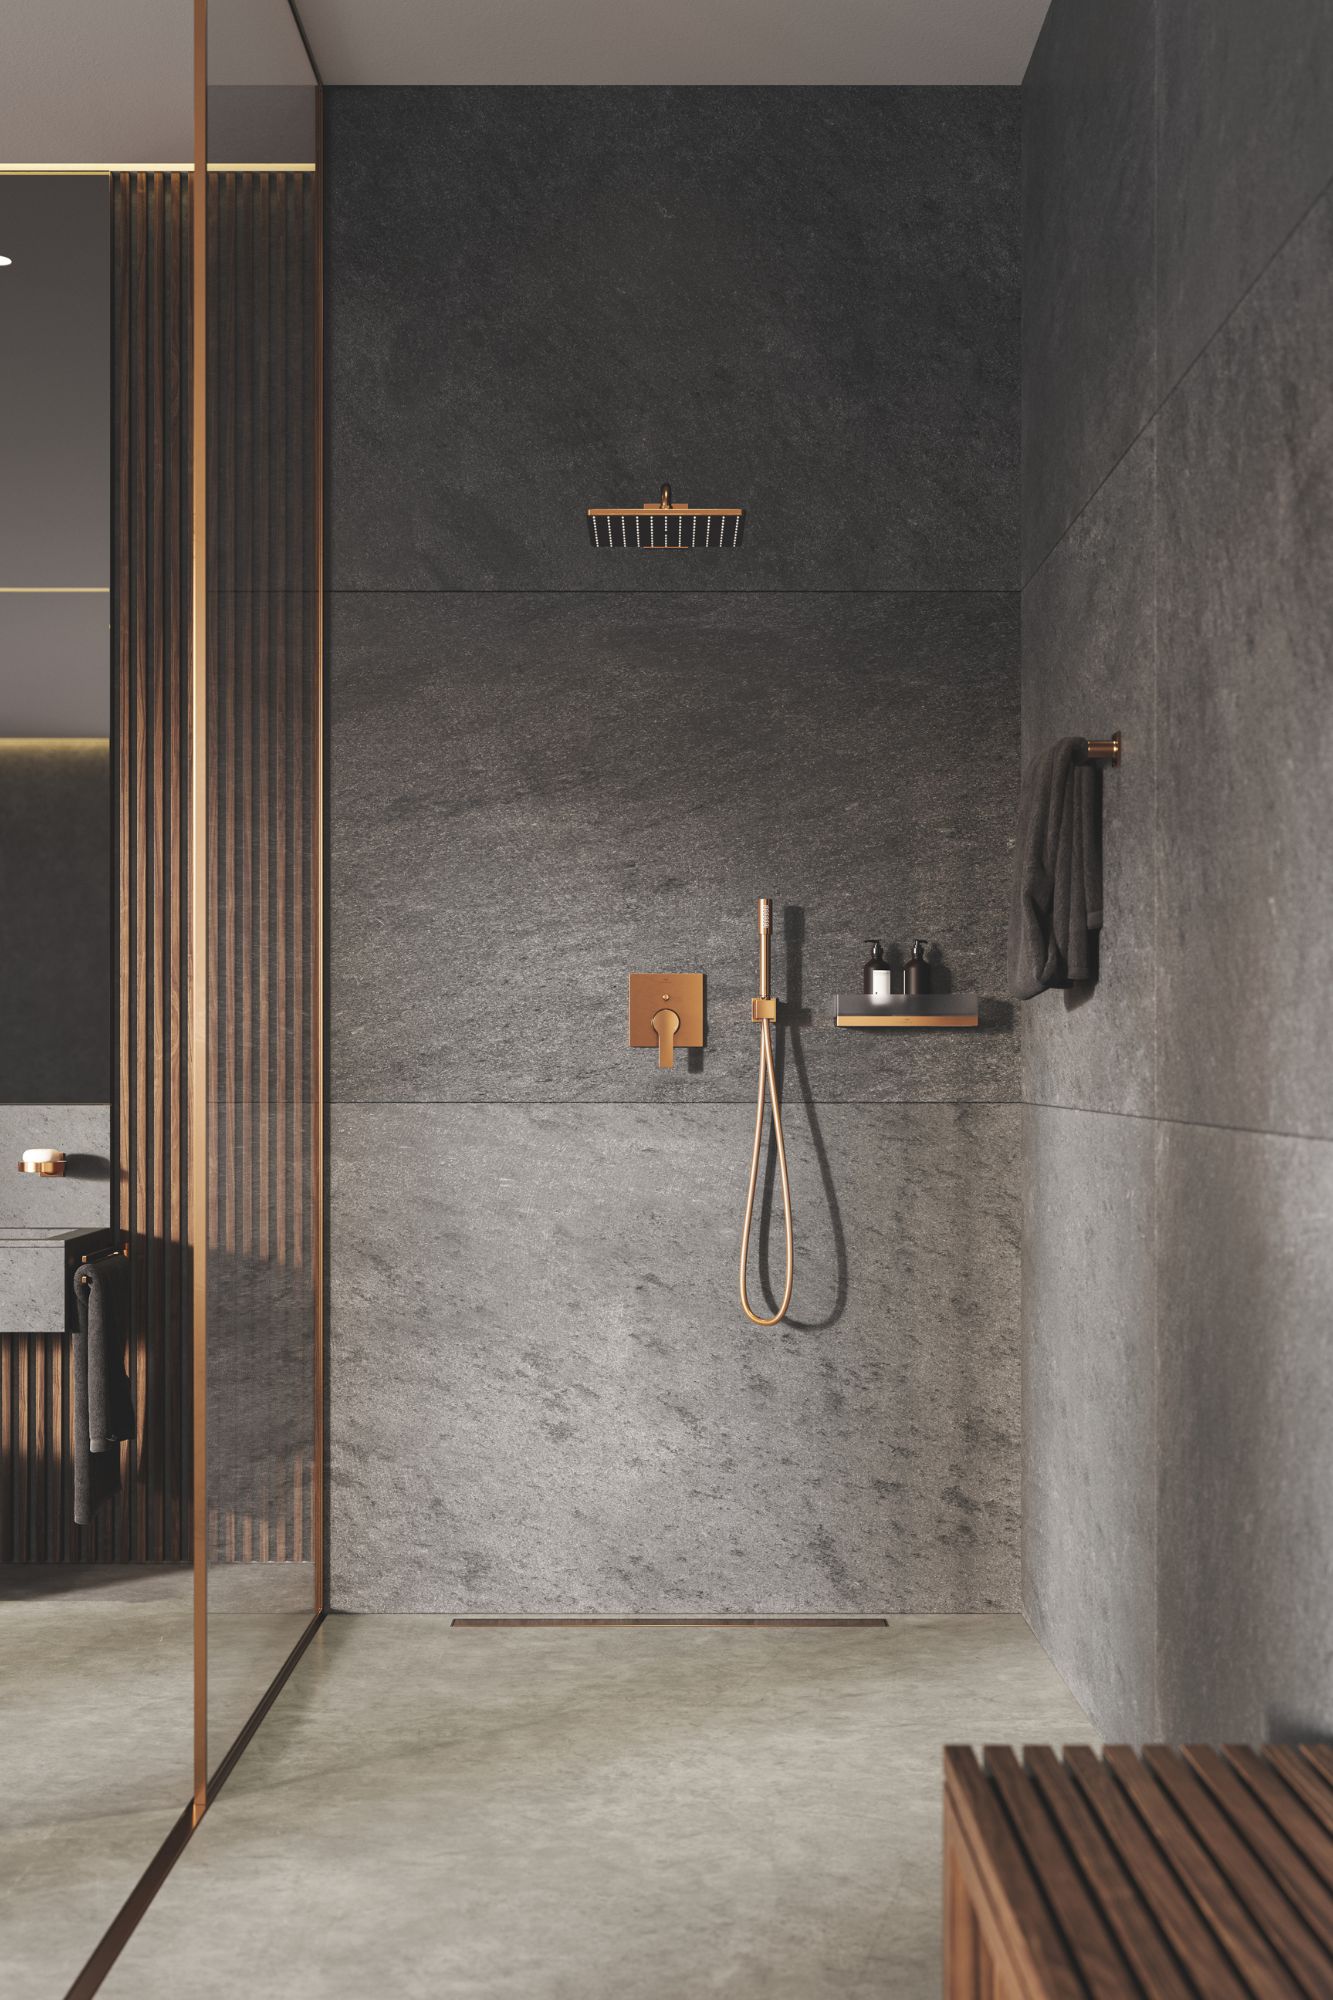 grohe collection, The Launch of GROHE SPA – Celebrating ‘Health through Water’